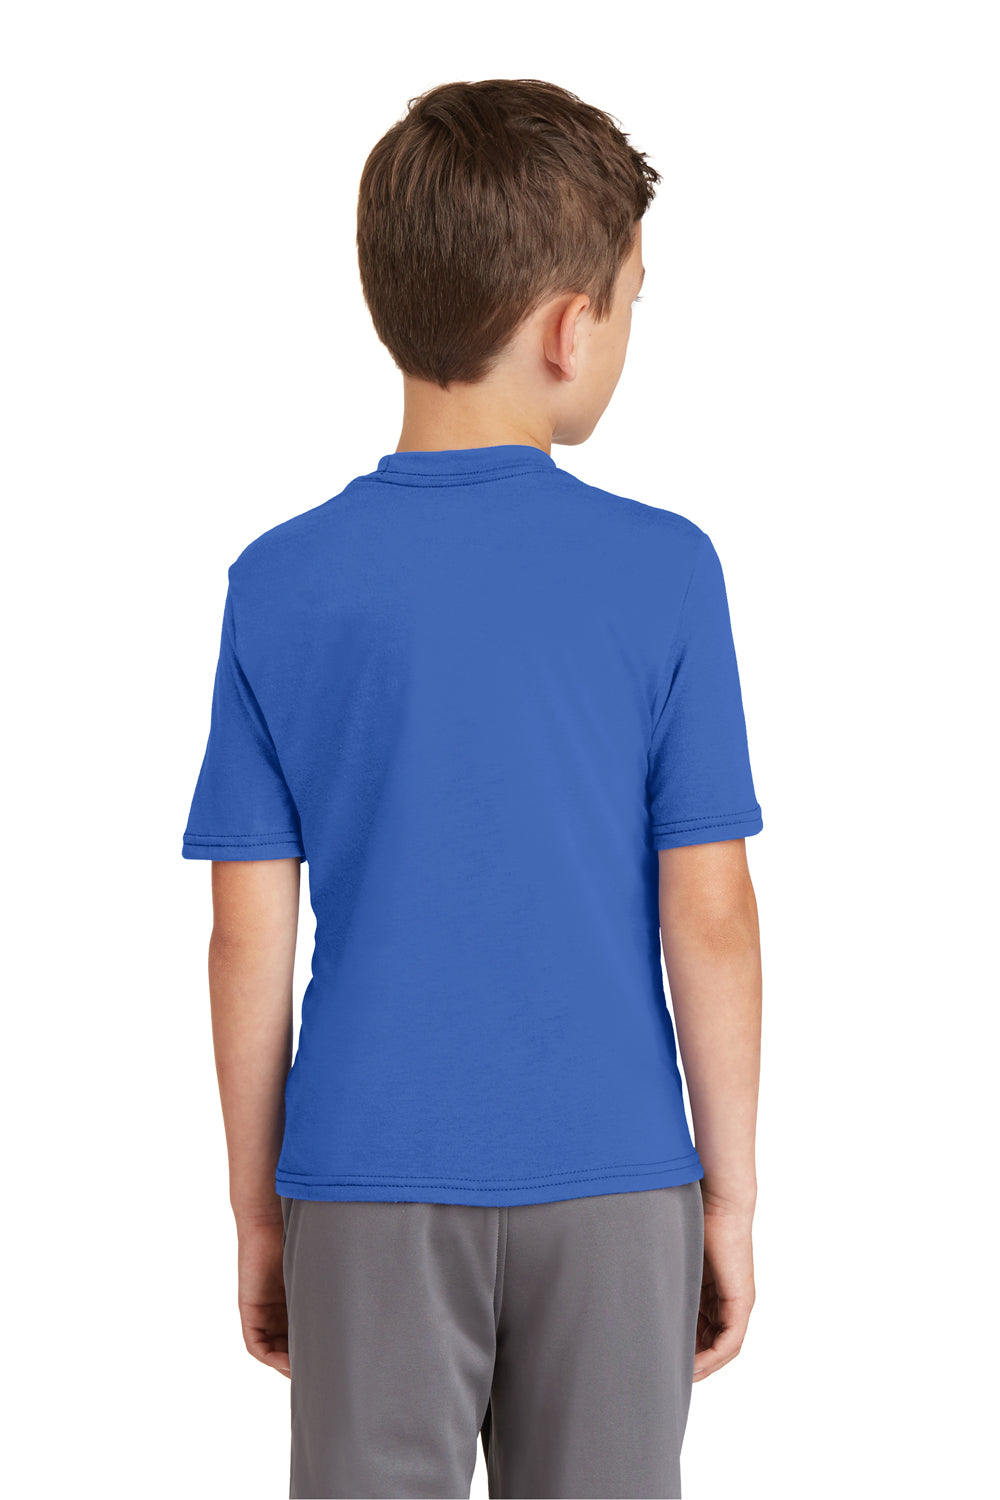 Port & Company PC381Y Youth Dry Zone Performance Moisture Wicking Short Sleeve Crewneck T-Shirt Royal Blue Back